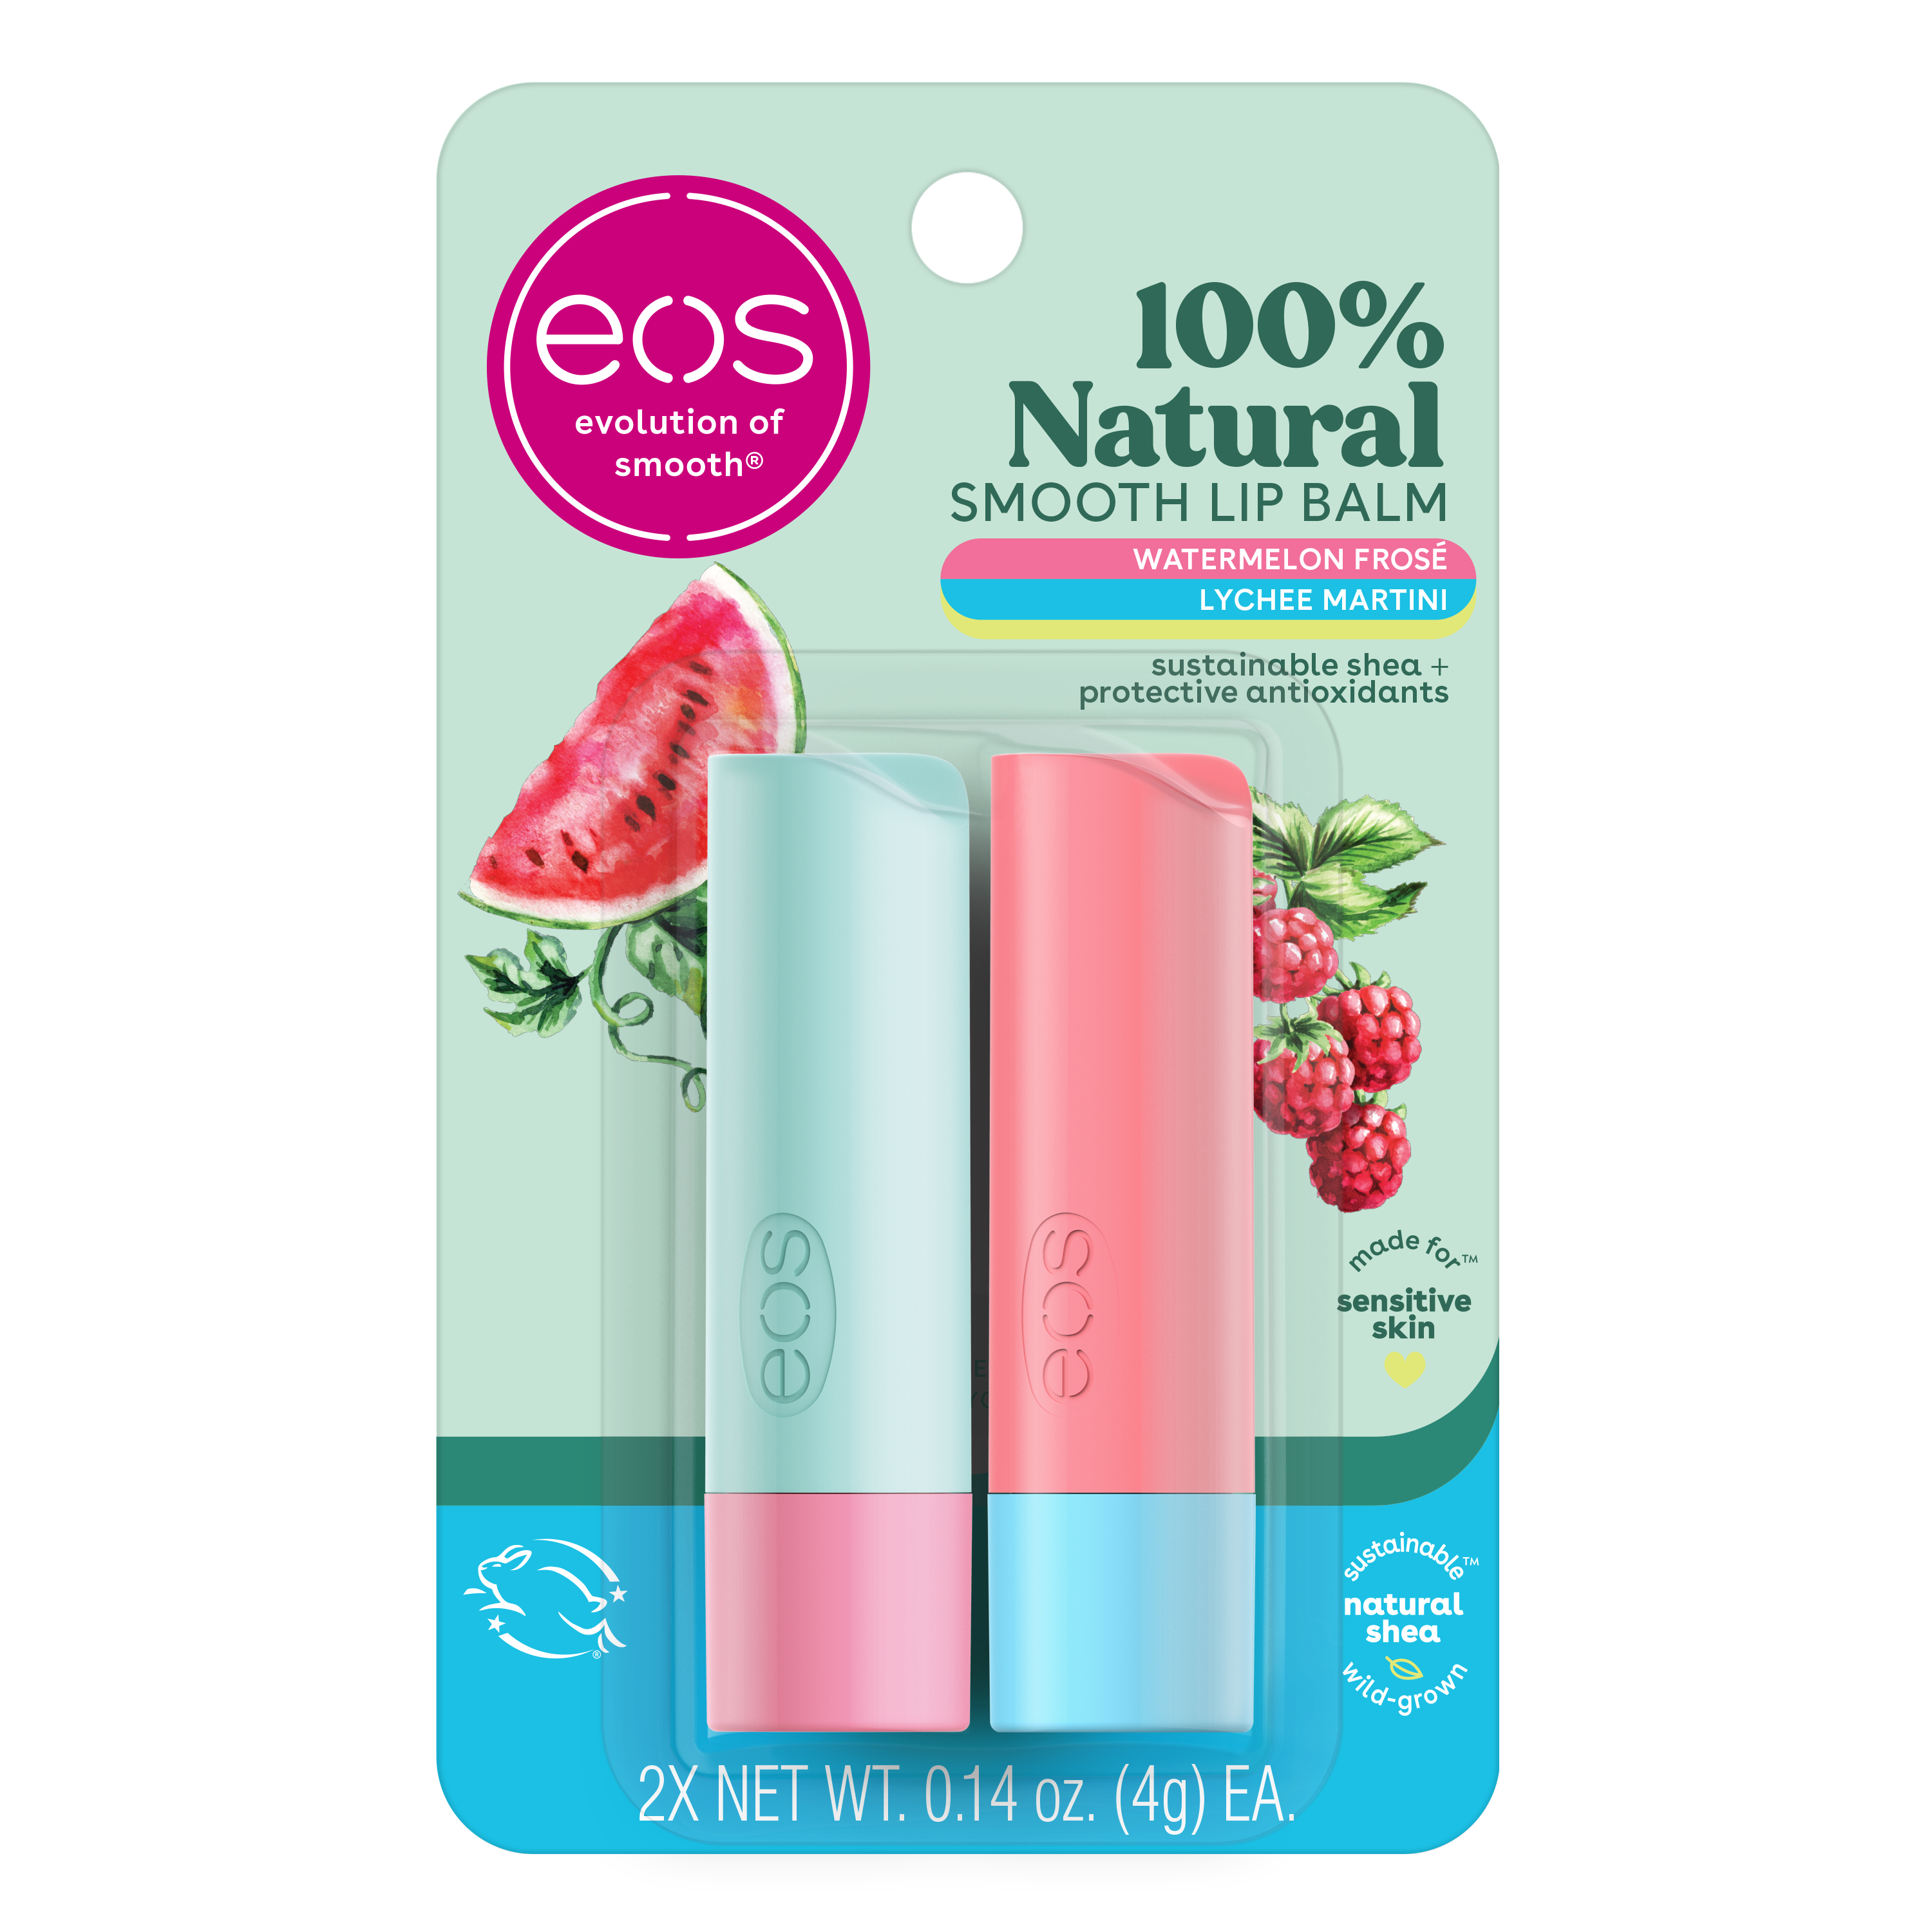 eos 100% Natural Lip Balm - Watermelon Frosé and Lychee Martini | 0.14 oz/2pk - image 1 of 7